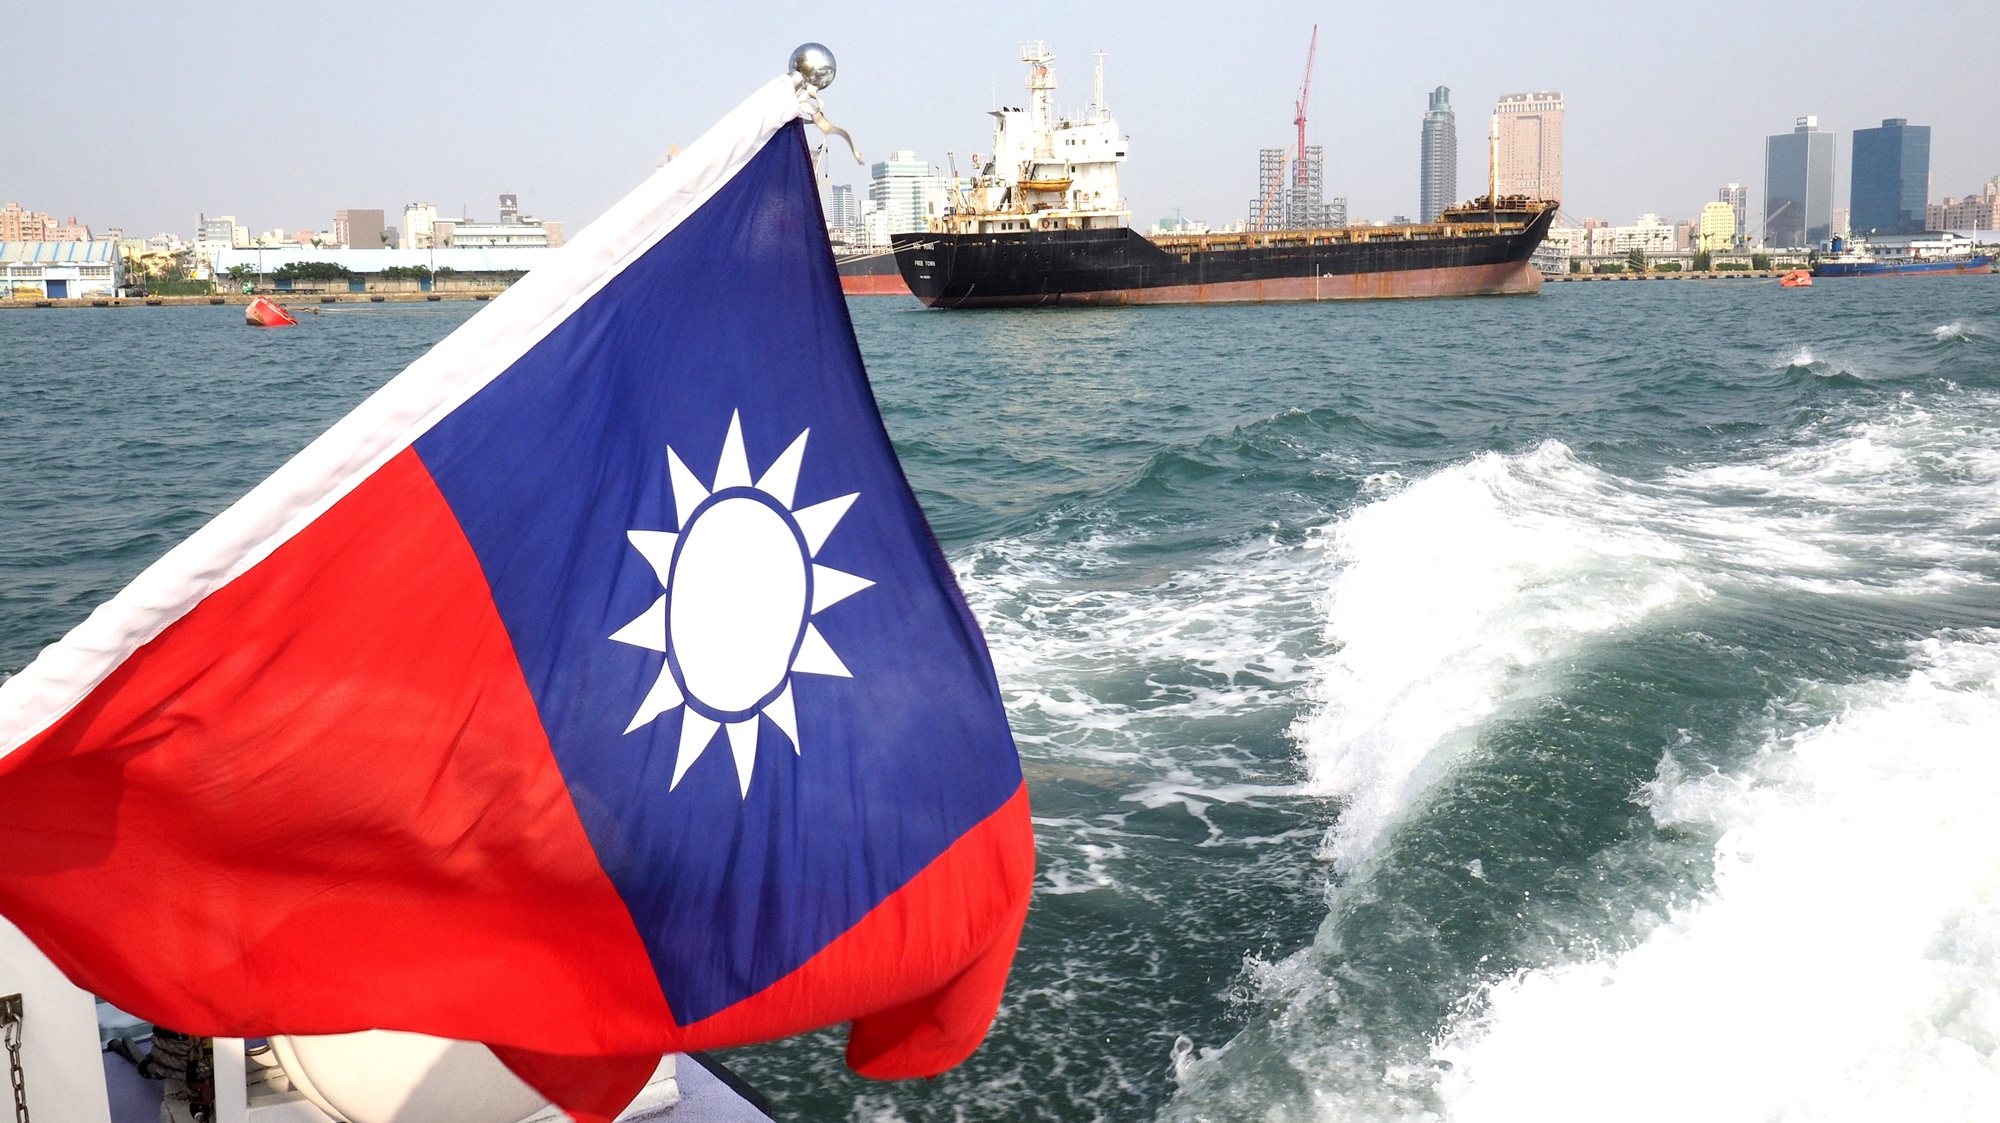 epa06057113 Taiwan&#039;s national flag flies on a boat sailing in the Kaohsiung Harbour in Kaohsiung, southern Taiwan, 12 January 2017 (issued 30 June 2017). On 30 June 2017, Taiwan welcomed a US arms sale package and the US Senate provision passing a bill allowing US warships to dock at Taiwan ports. The arms sale will &#039;help strengthen Taiwan&#039;s self-defense capabilities. This increases Taiwan&#039;s confidence and ability to maintain the status quo of peace and stability across the Taiwan Strait,&#039; President Tsai Ing-wen said in a twitter message. On 29 June, the US State Department approved a 1.42 billion US dollar arms sale package for Taiwan, one day after the US Senate passed a bill to allow US warships to dock at Taiwan ports. China protested the US arms sale and US Senate act on port call, calling it violation of the Sino-US communique and interference in China&#039;s domestic affairs.  EPA/DAVID CHANG